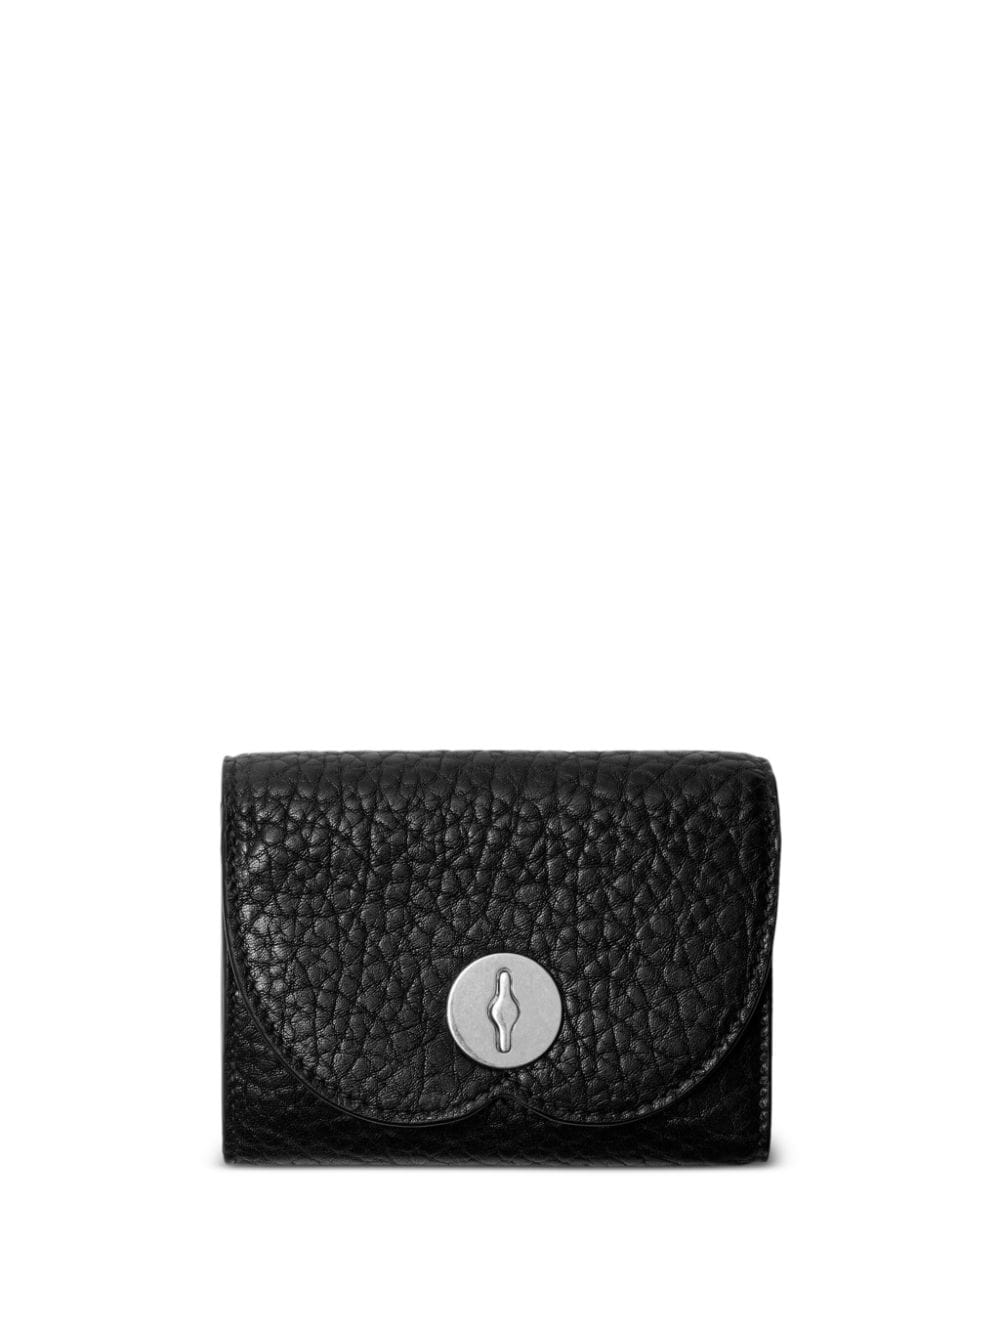 Burberry Leather Mini Wallet In Black